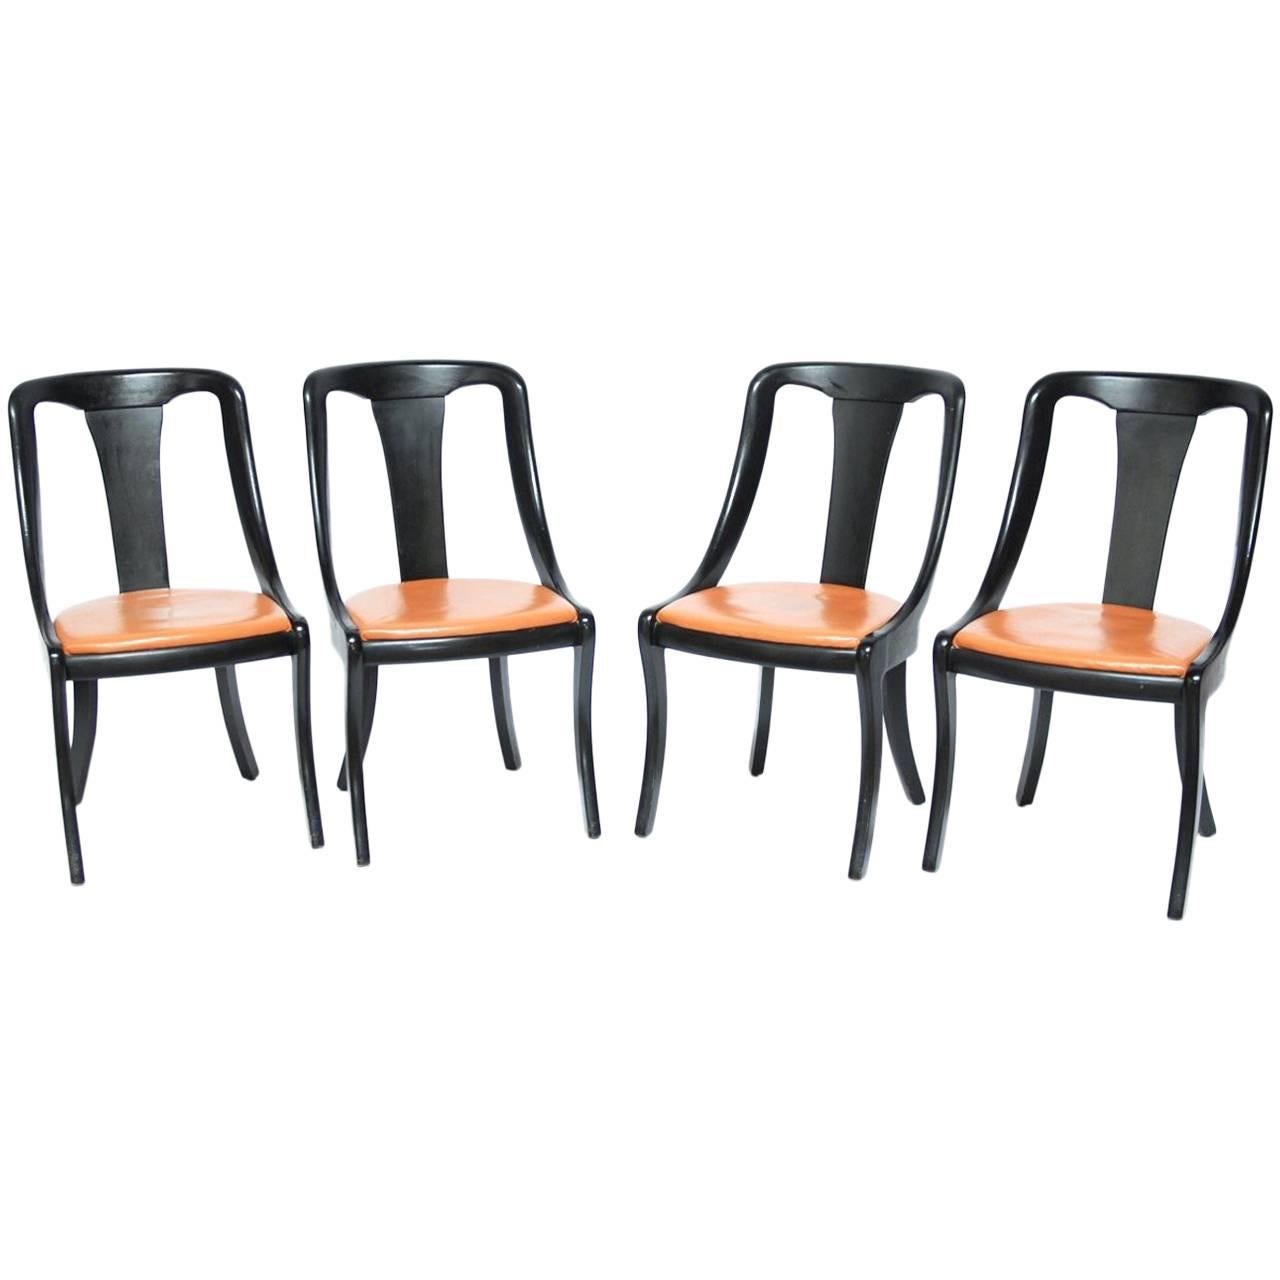 Set of Four Mid-Century Black Lacquer Scoop Dining Chairs